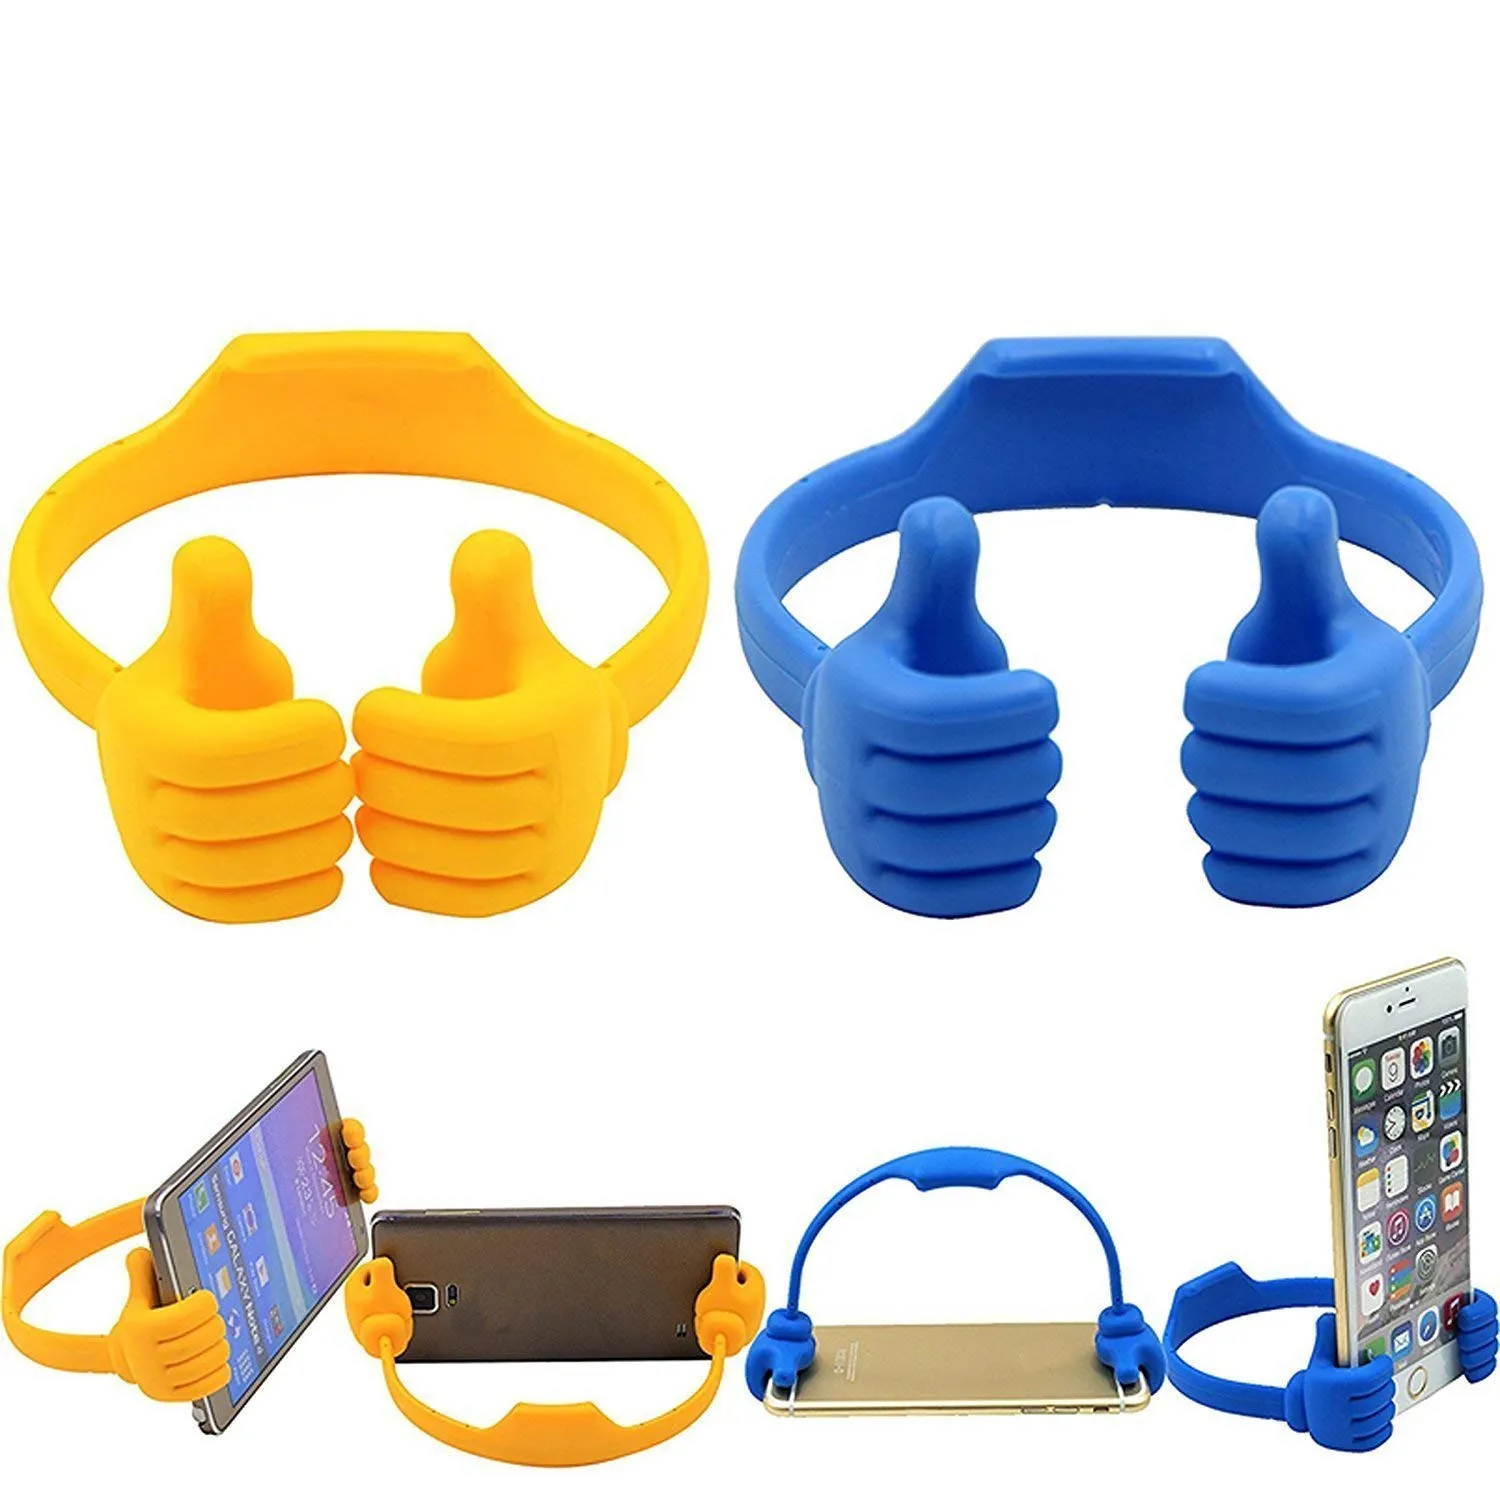 Buy Universal Thumb Hand Holder for Cell Phone and Tablet at best price in Pakistan | RHizmall.pk